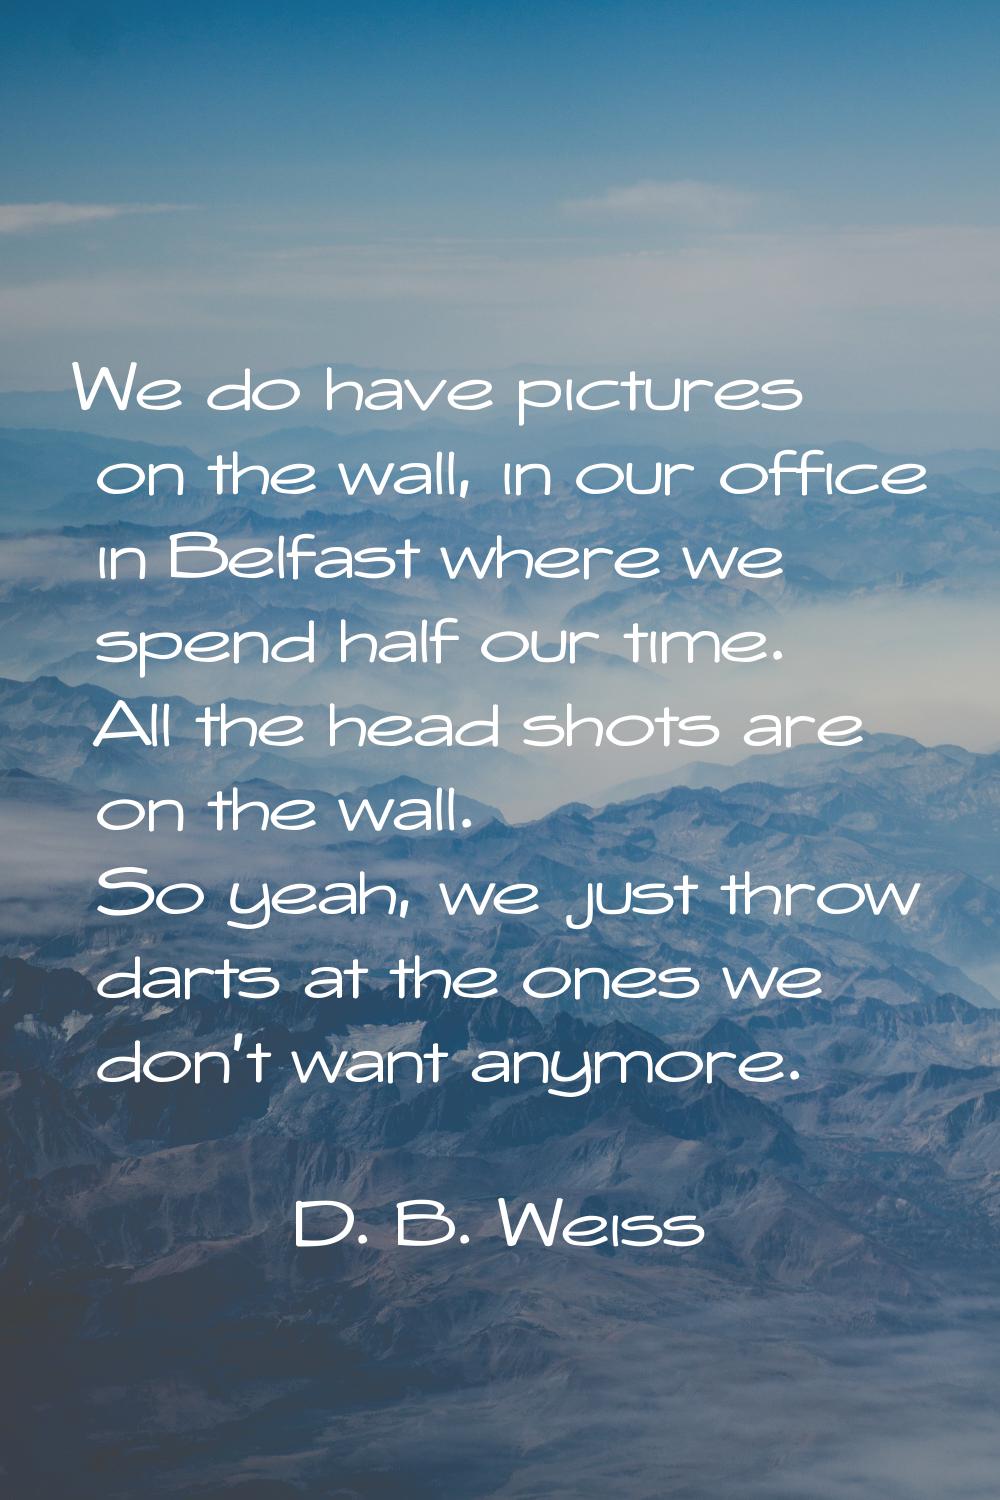 We do have pictures on the wall, in our office in Belfast where we spend half our time. All the hea